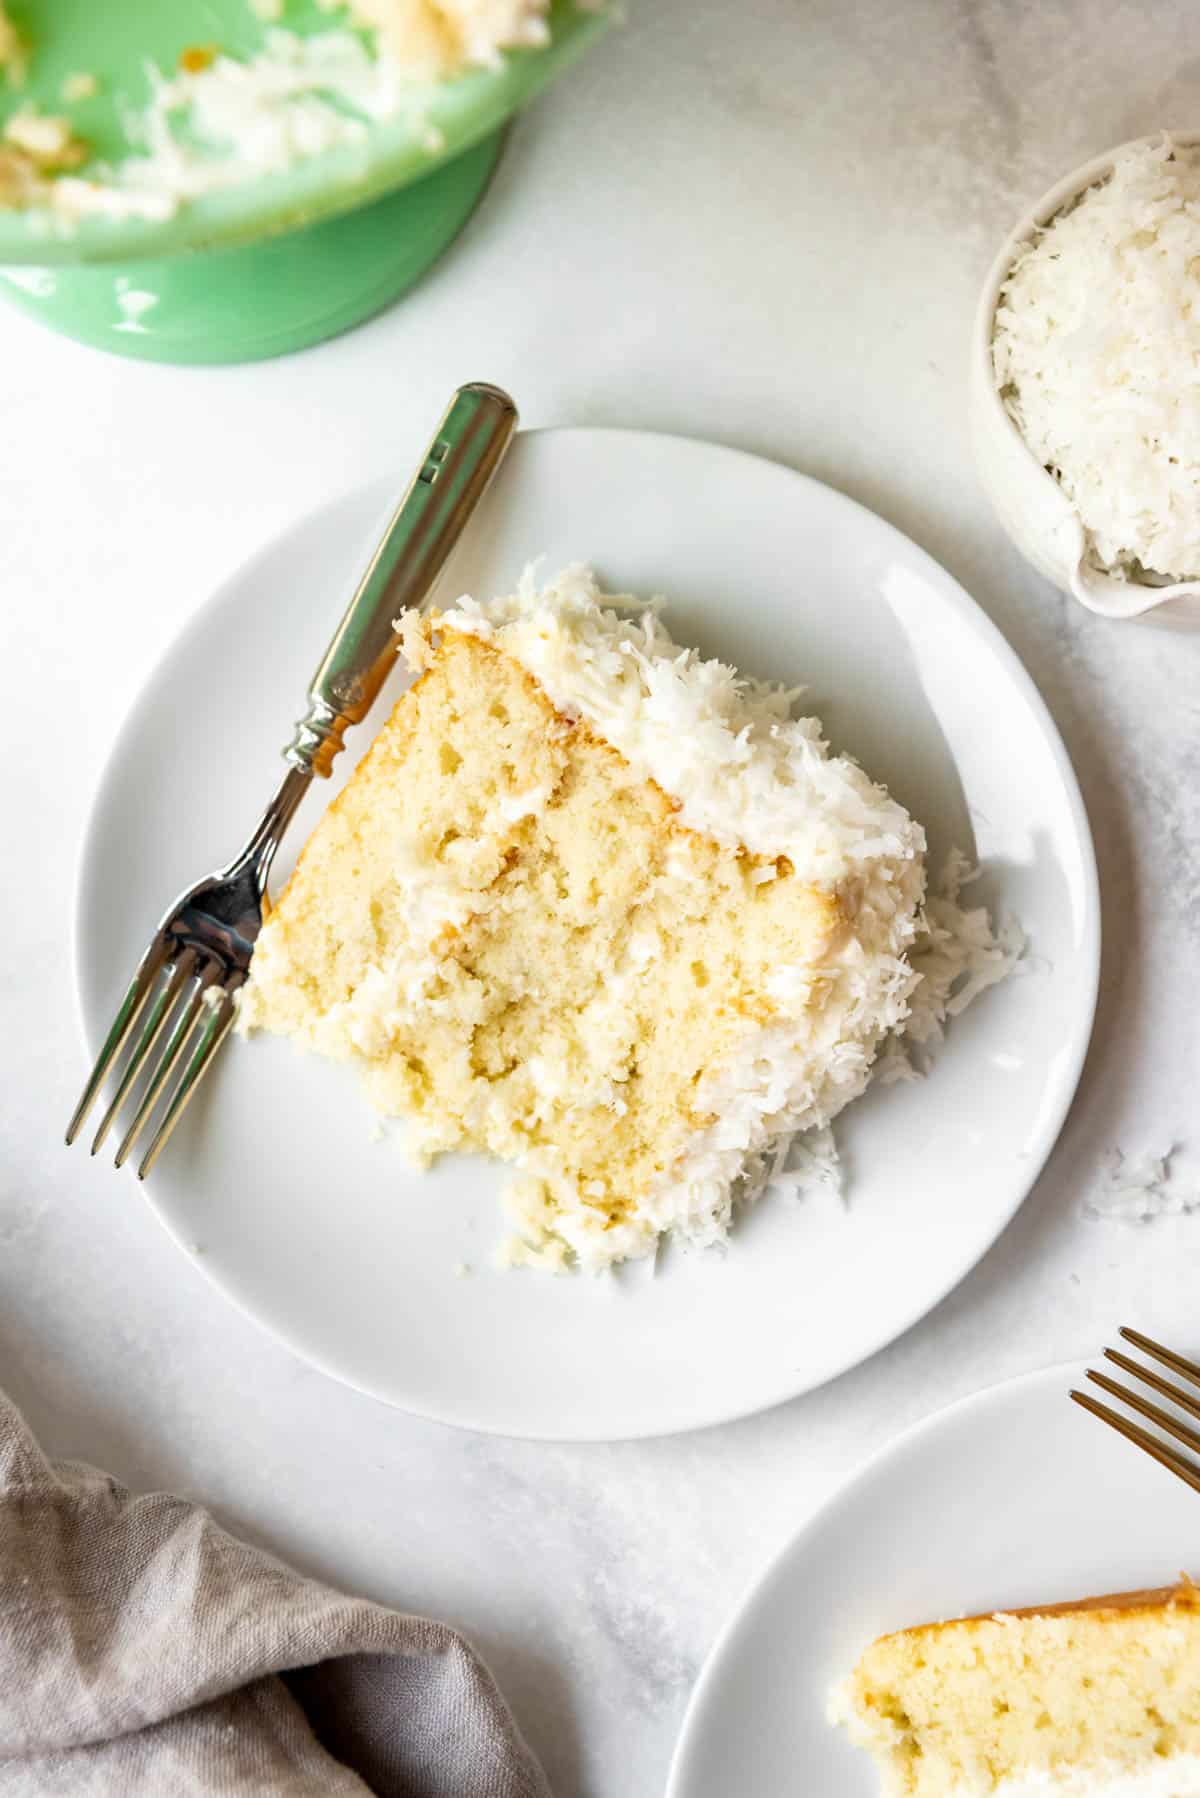 Top view of from scratch coconut cake on a white plate with a fork.